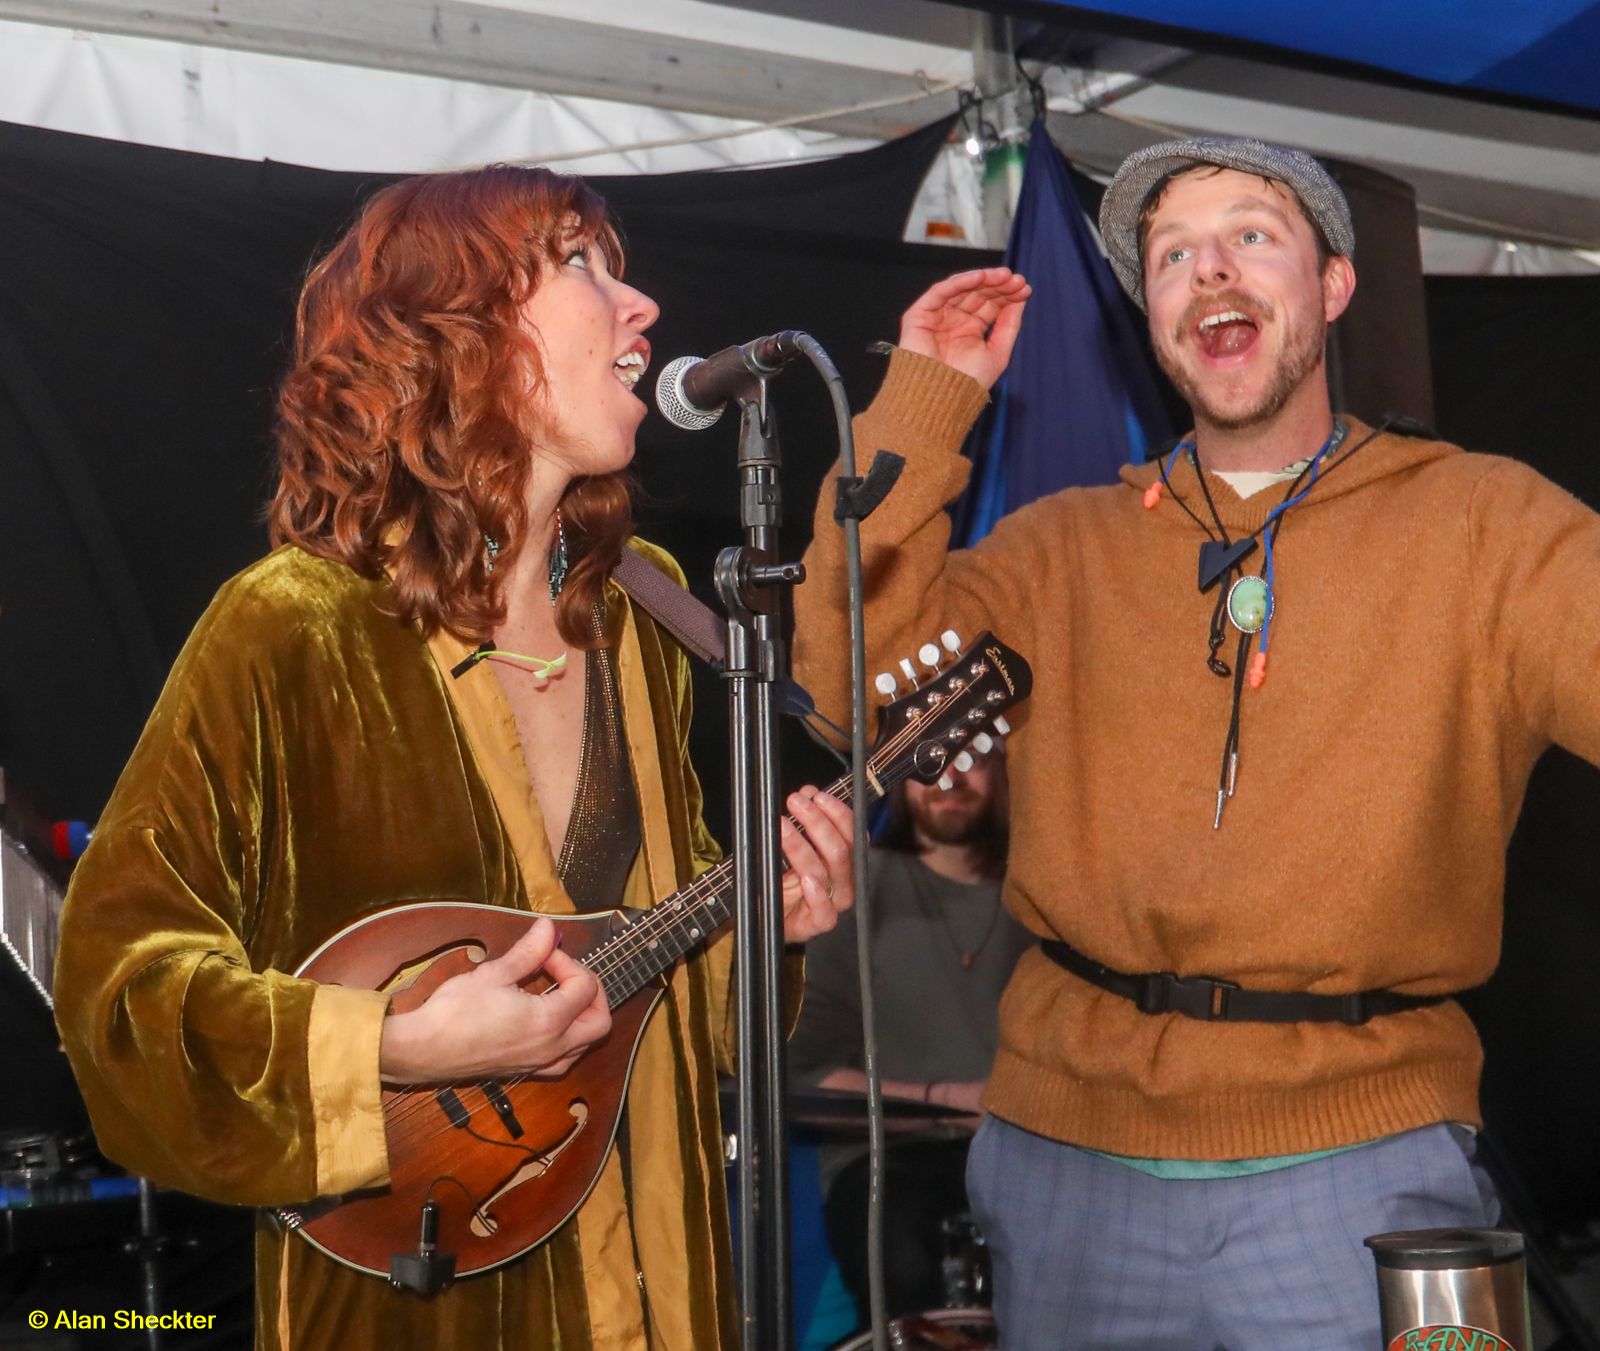 Jess Stoll (left) and Caleb Sanders of Boot Juice during an impromptu VIP-tent set on Saturday